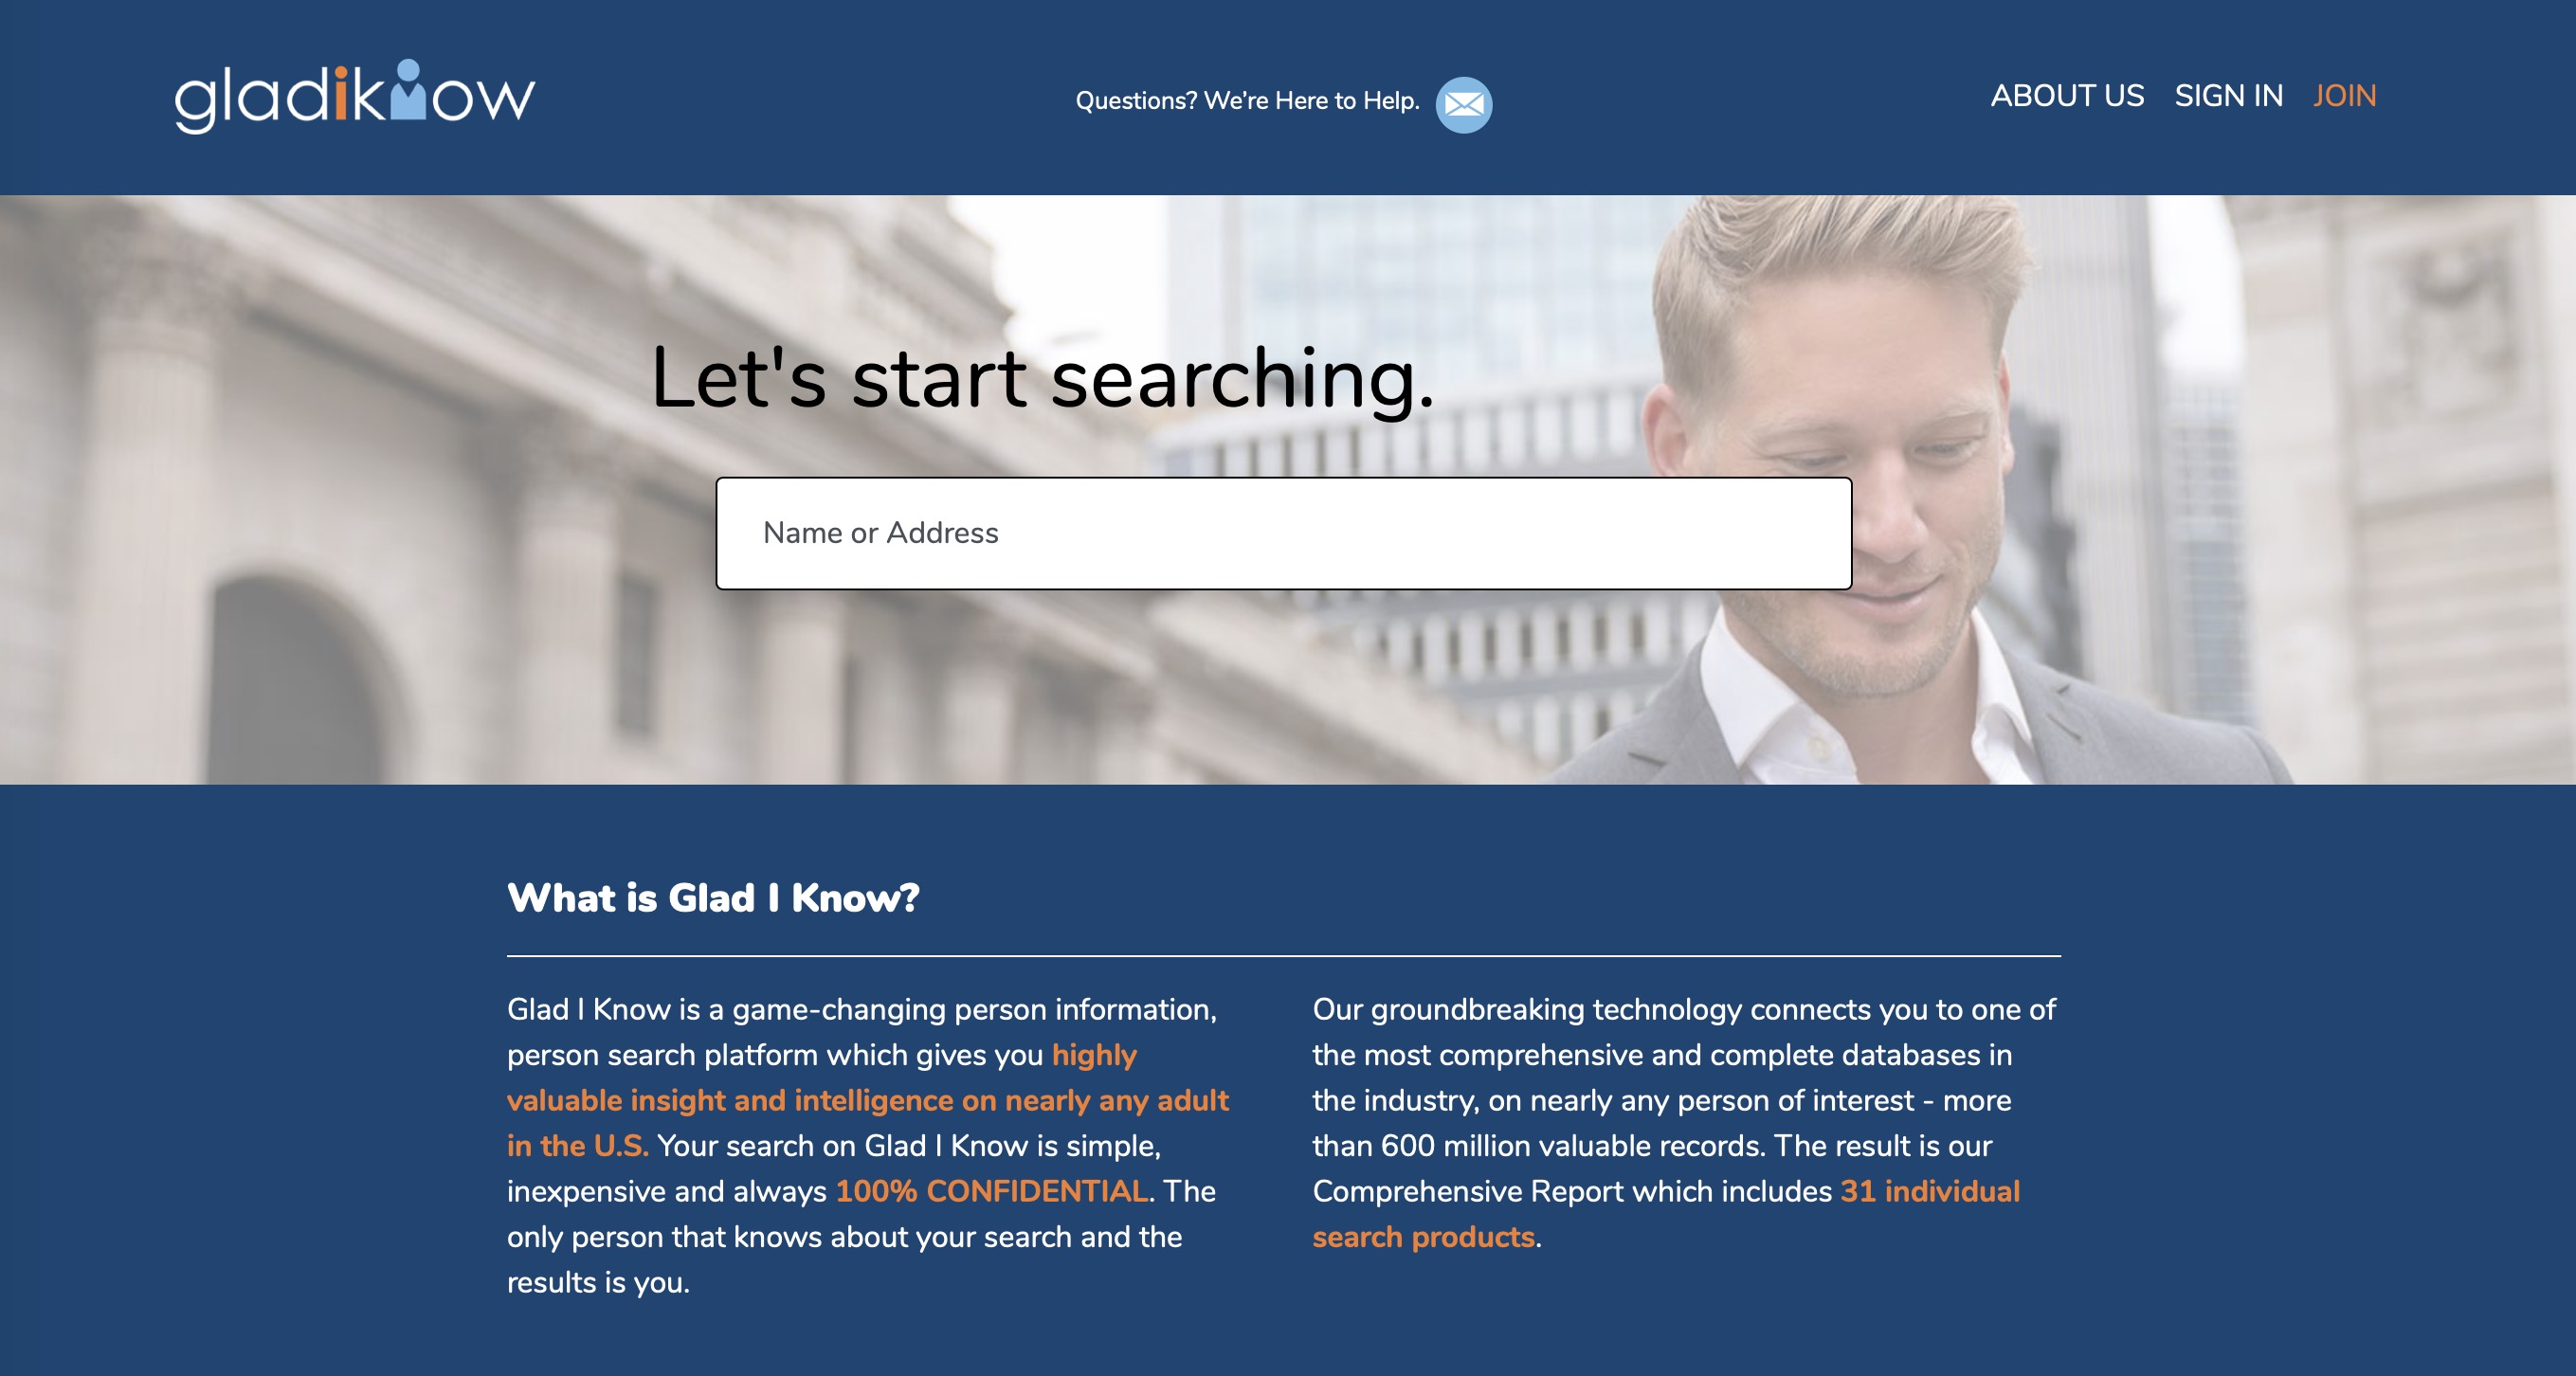 Landing Page for Glad I Know